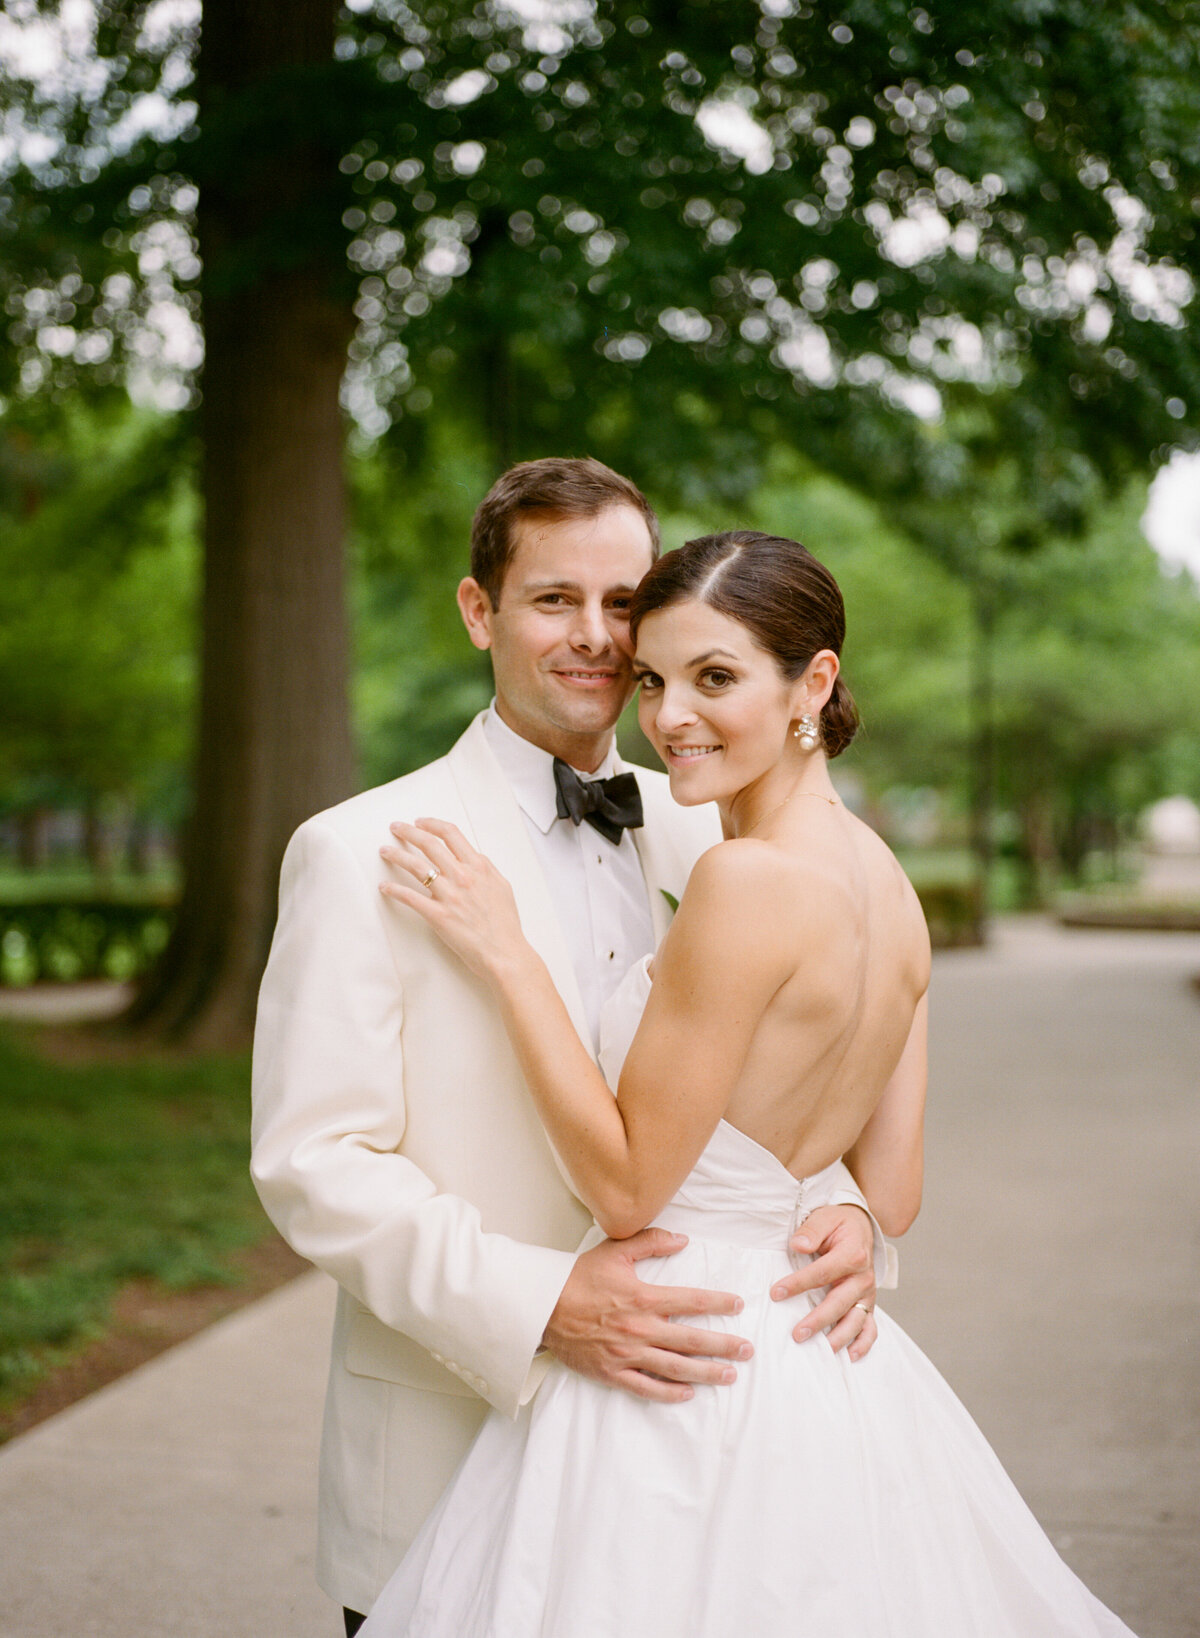 image of bride and groom holding each other outdoors